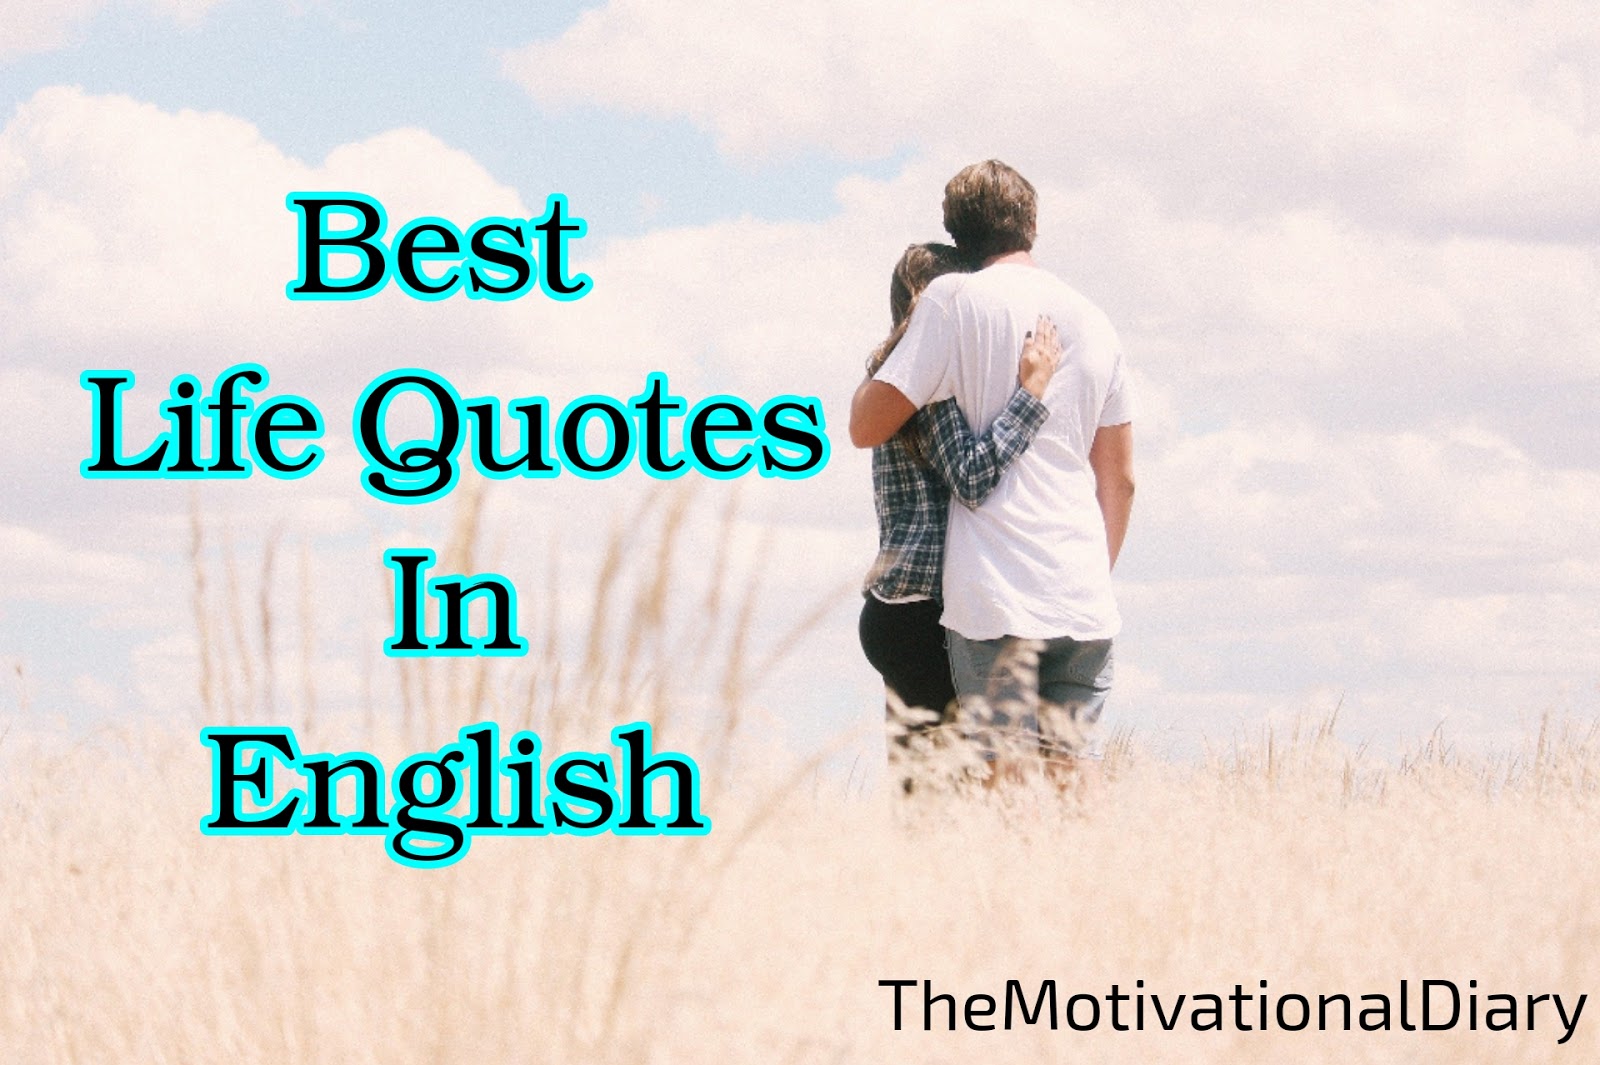 Best life quotes in English